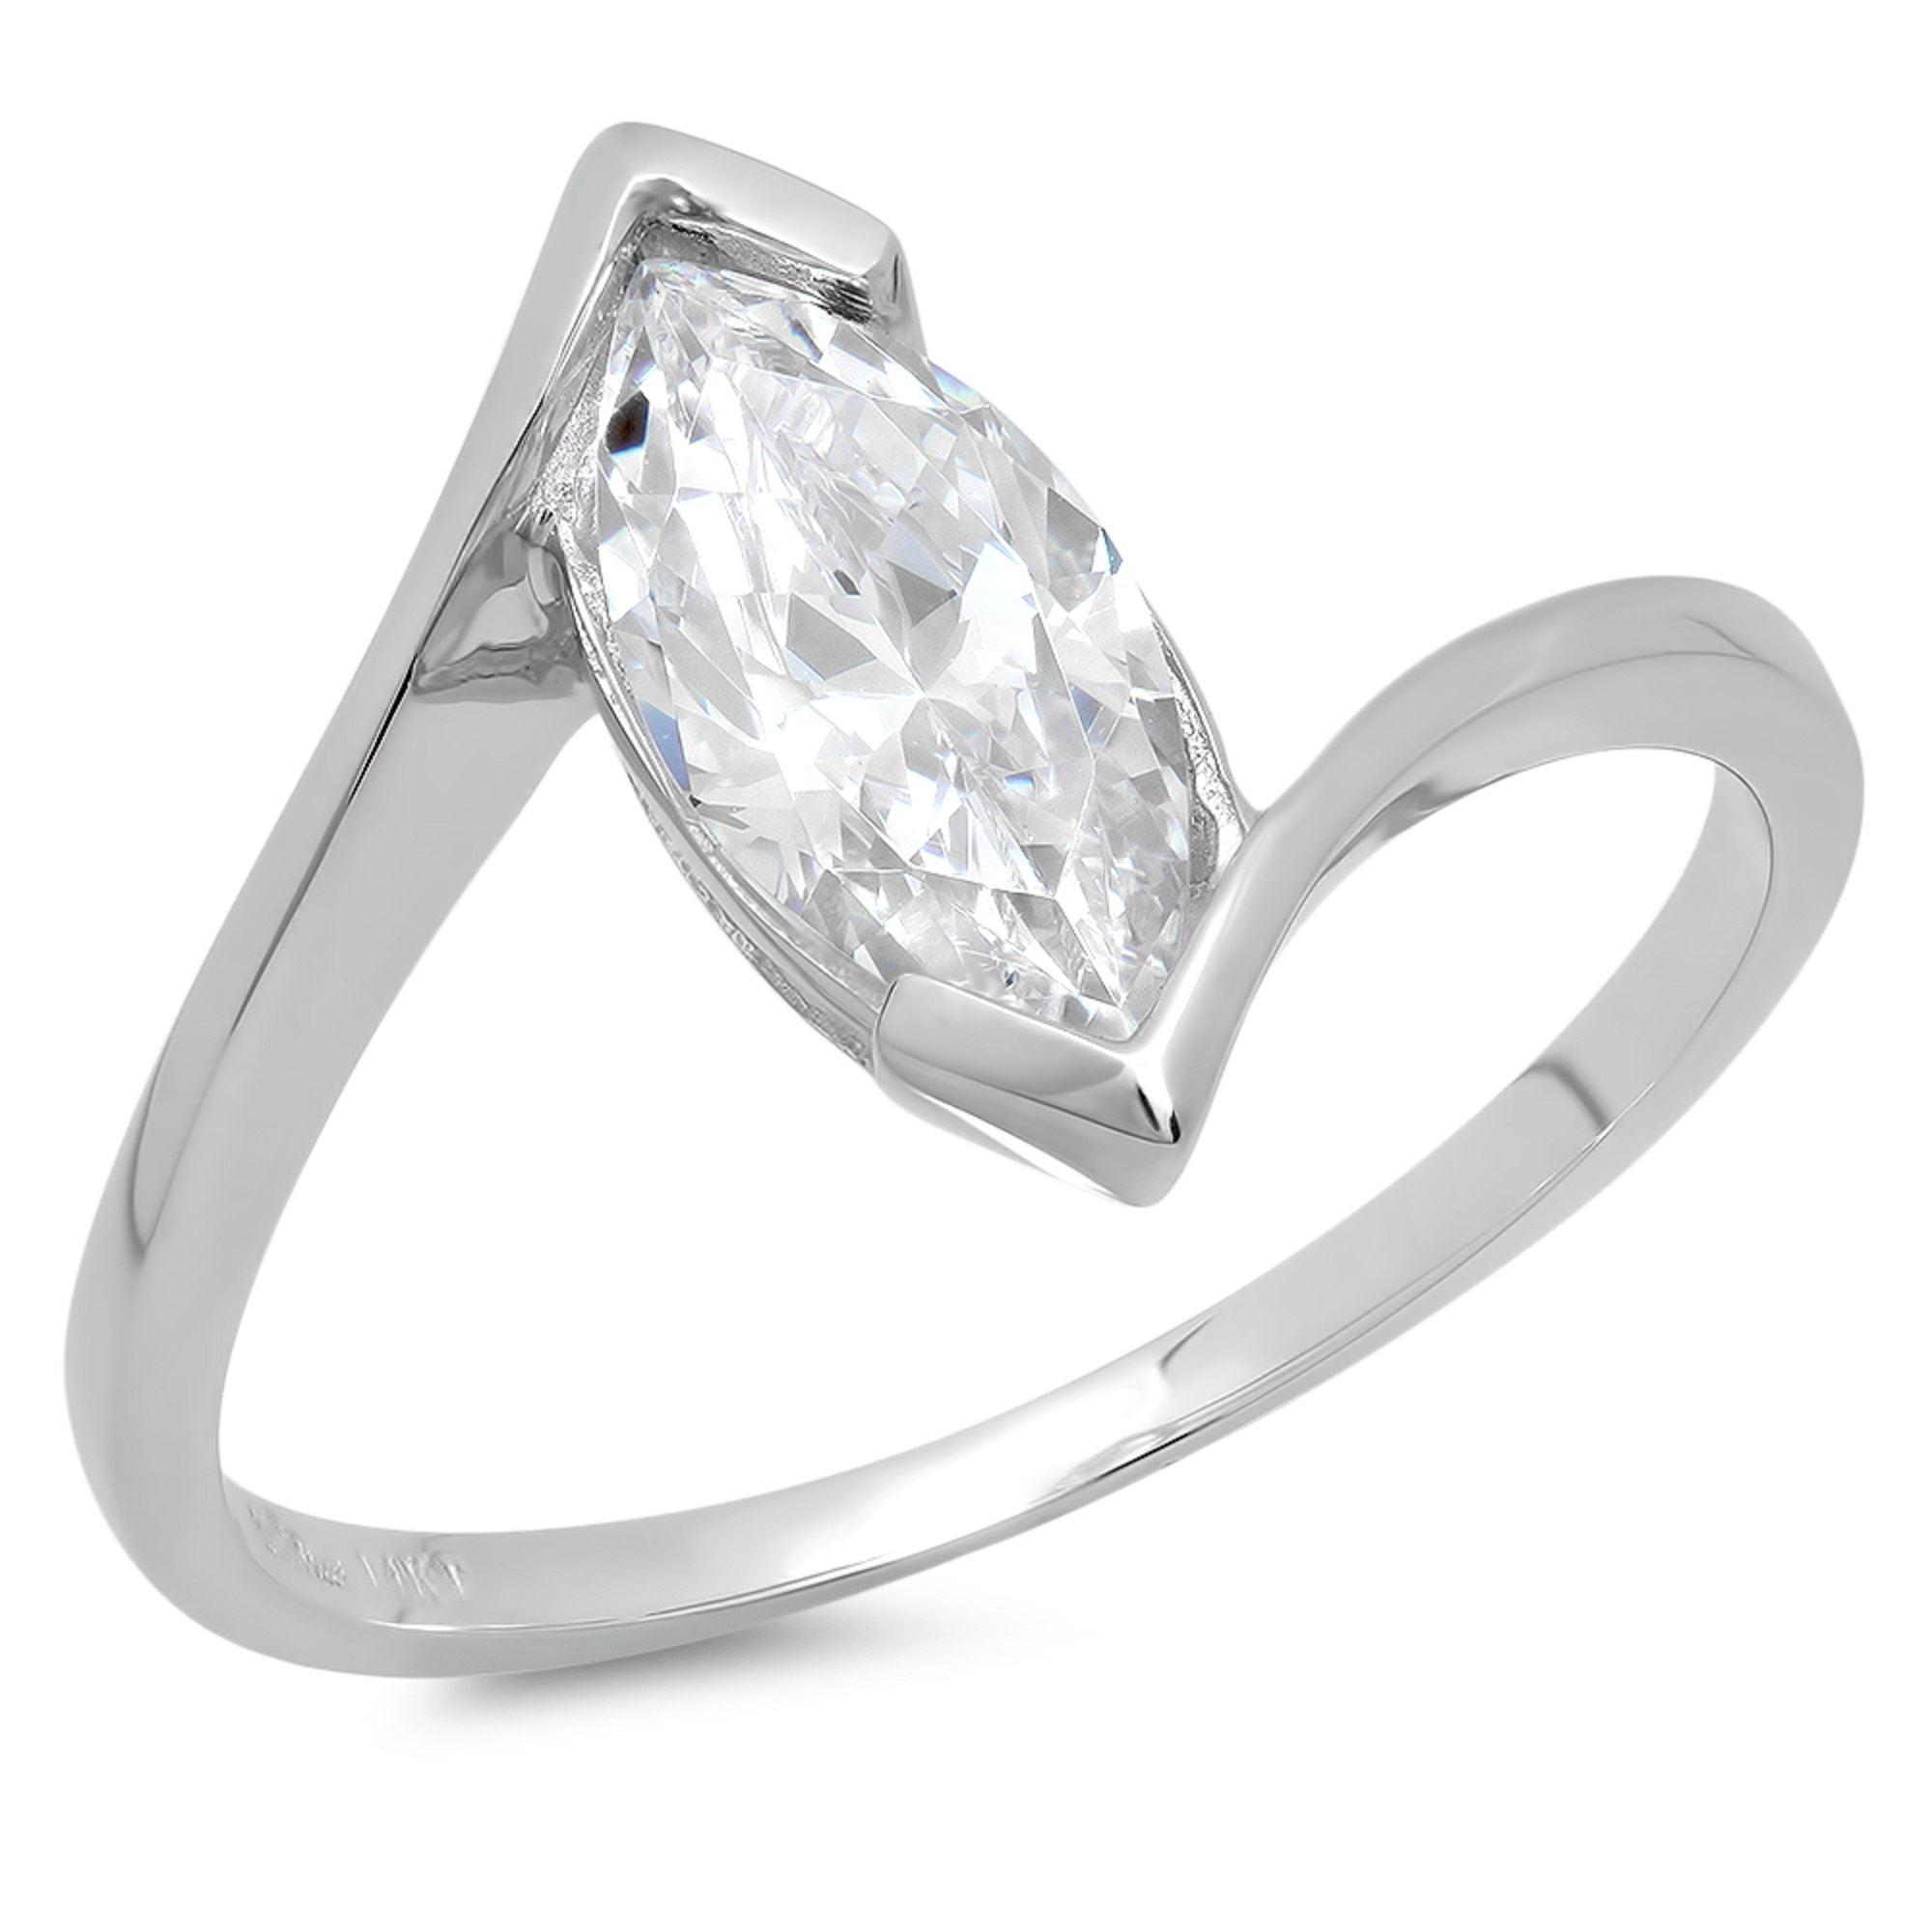 18k White Gold UK Hallmarked Special Offer..Marquise Diamond Engagement Ring